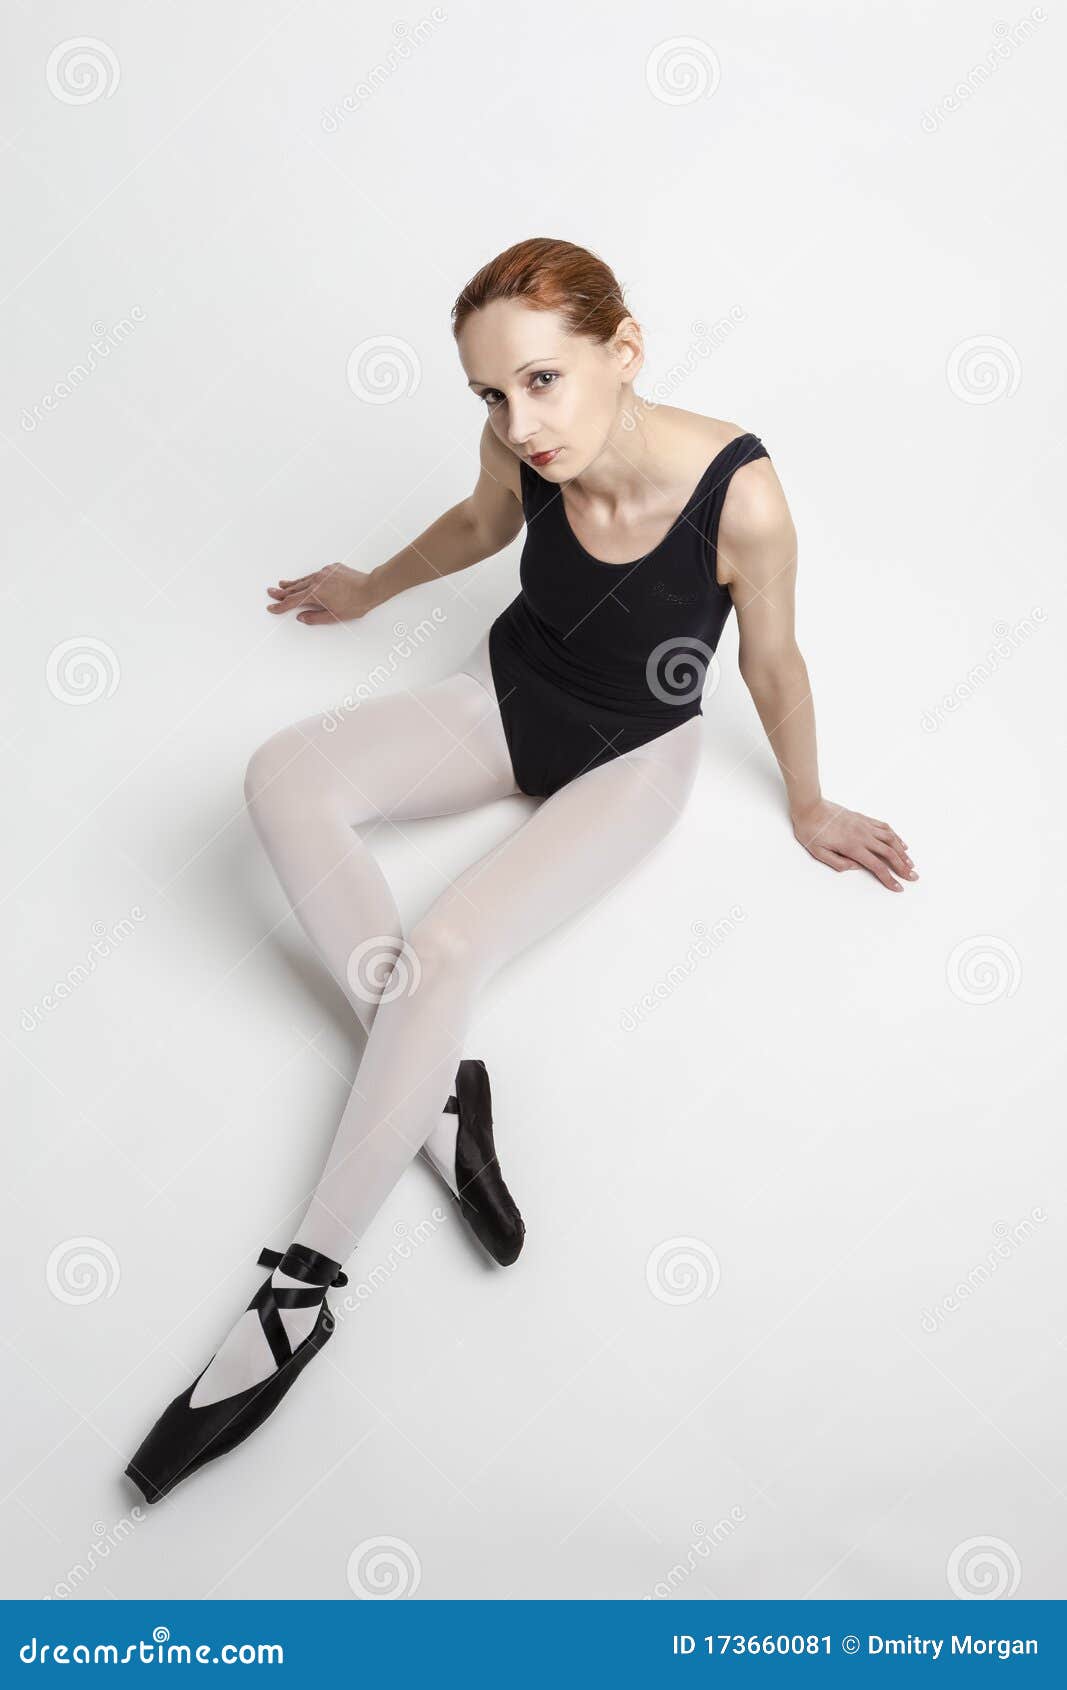 Sport Ideas. Relaxing and Dreaming Caucasian Professional Ballet Dancer in Body Suit and Pointes Shoes Against White Stock Image - Image of ballerina, entertainment: 173660081